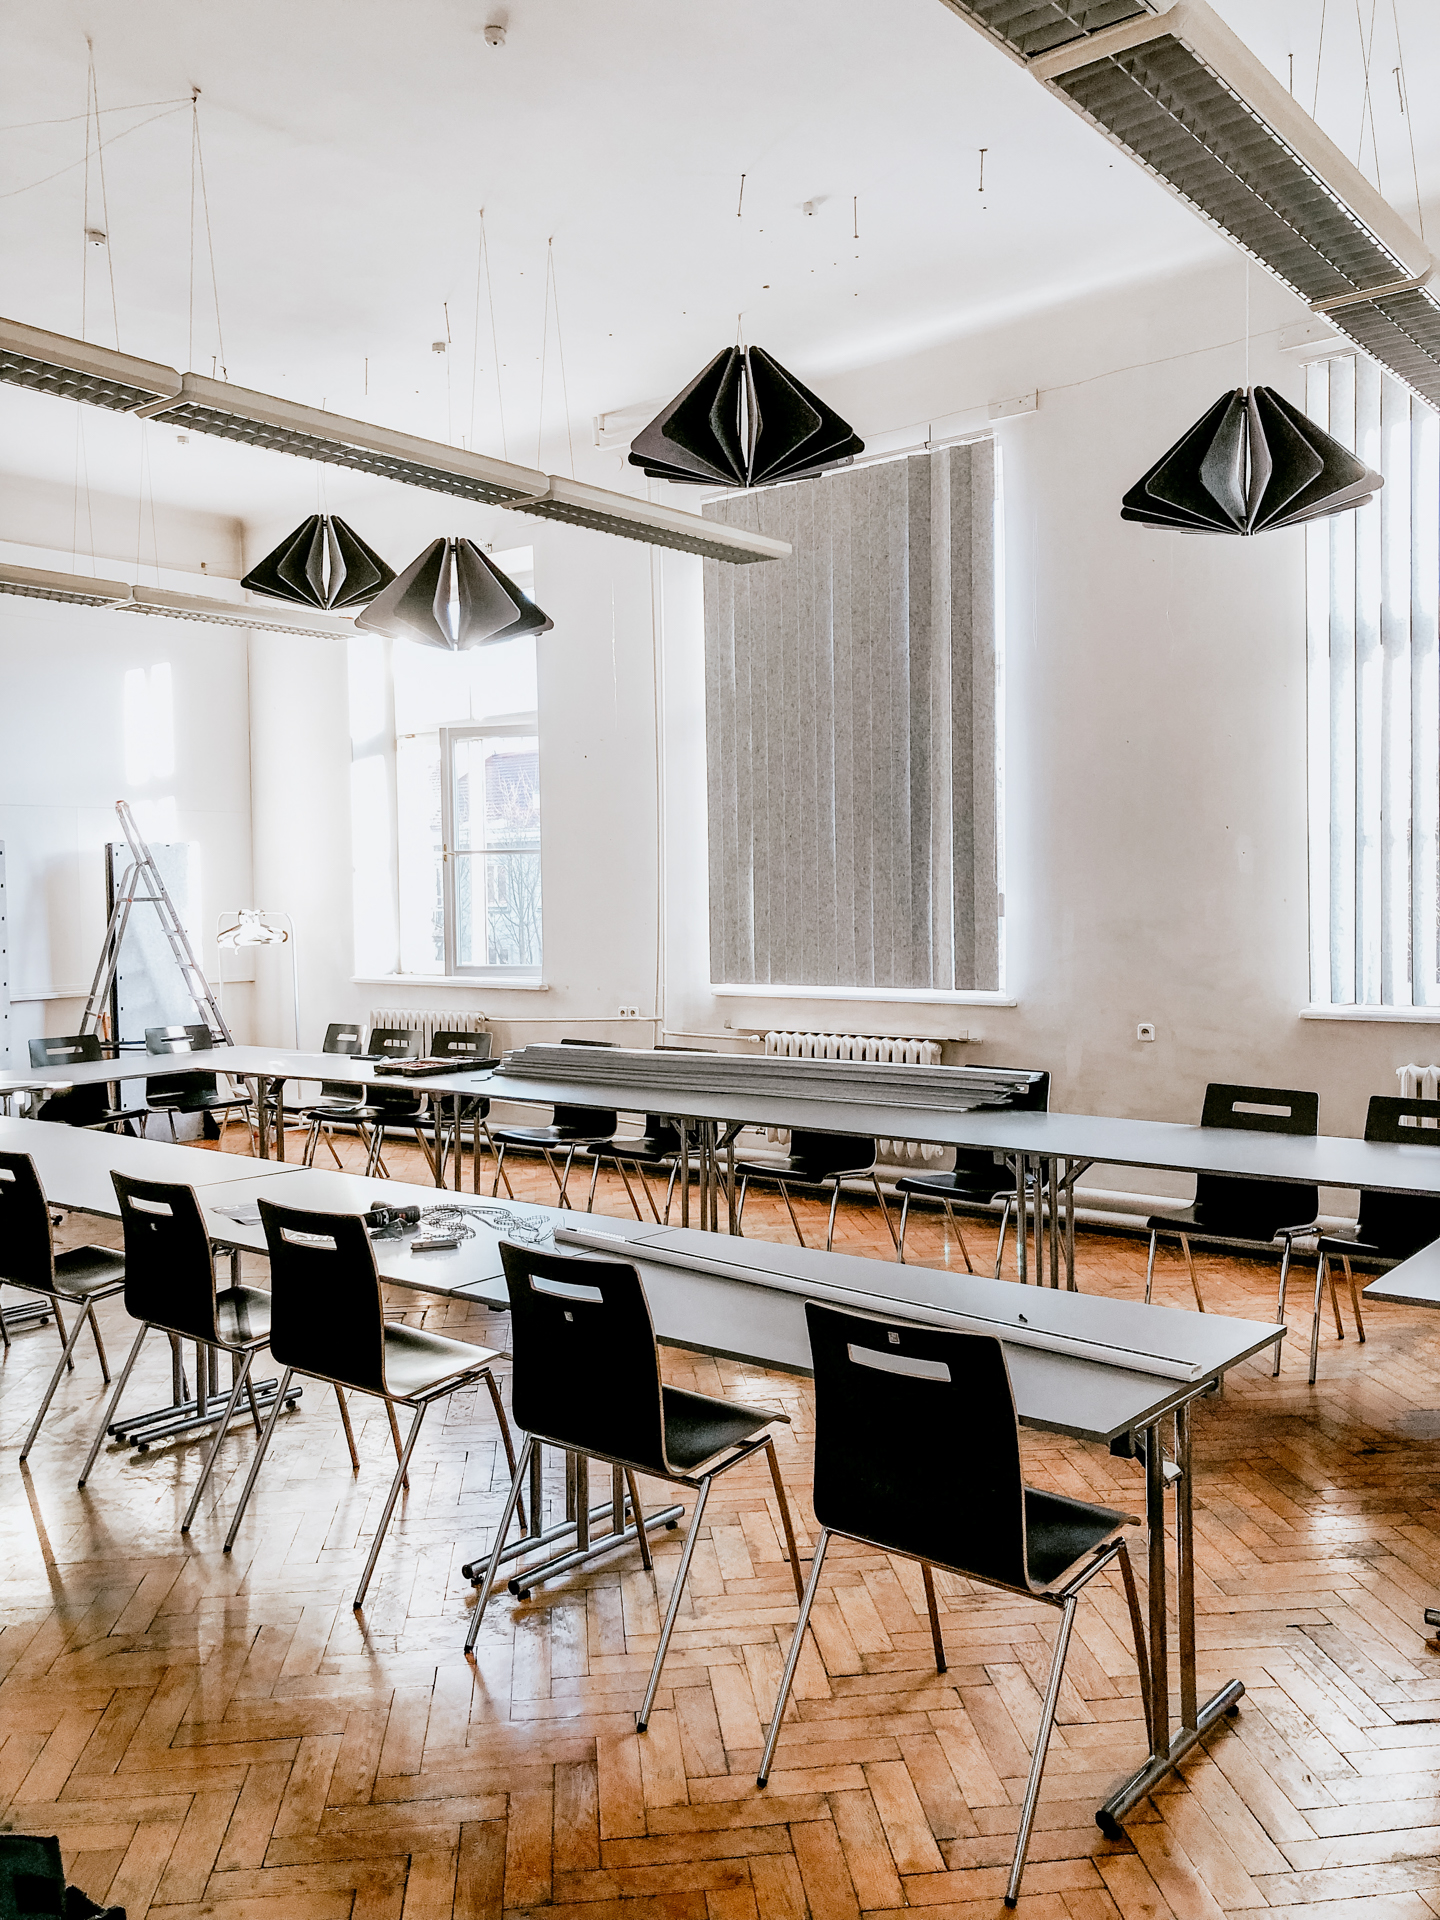 Lecture room at the Academy of Fine Arts in Krakow, where acoustic adaptation was carried out by installing sound absorbing acoustic panels, standing sound absorbing partitions and hanging sound absorbing acoustic ceiling rafts.